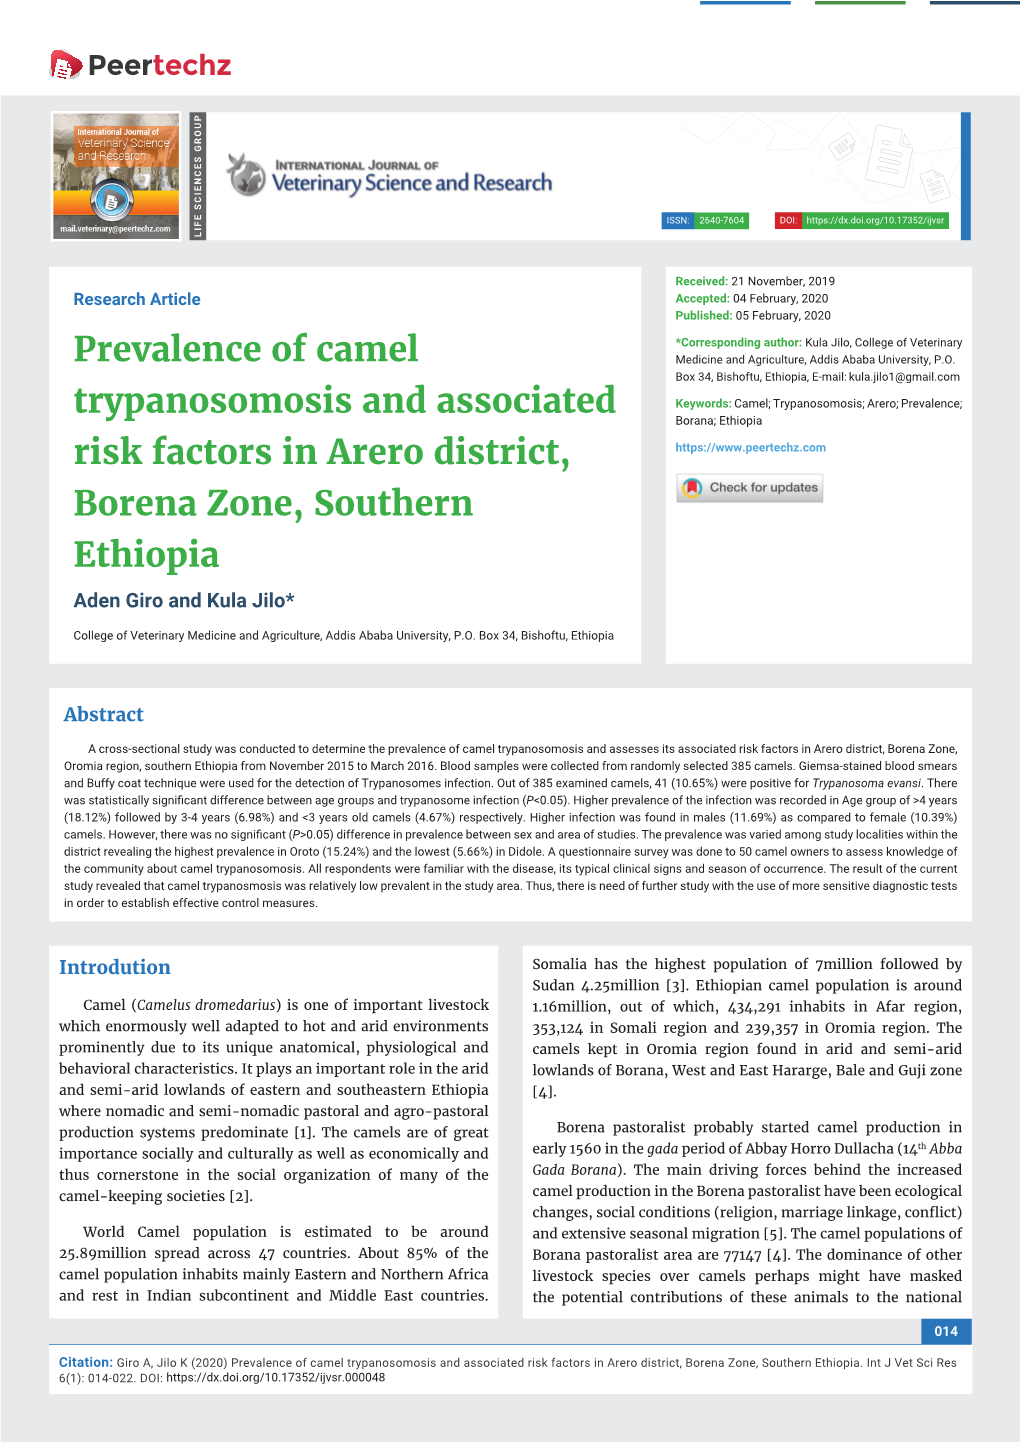 Prevalence of Camel Trypanosomosis and Associated Risk Factors in Arero District, Borena Zone, Southern Ethiopia